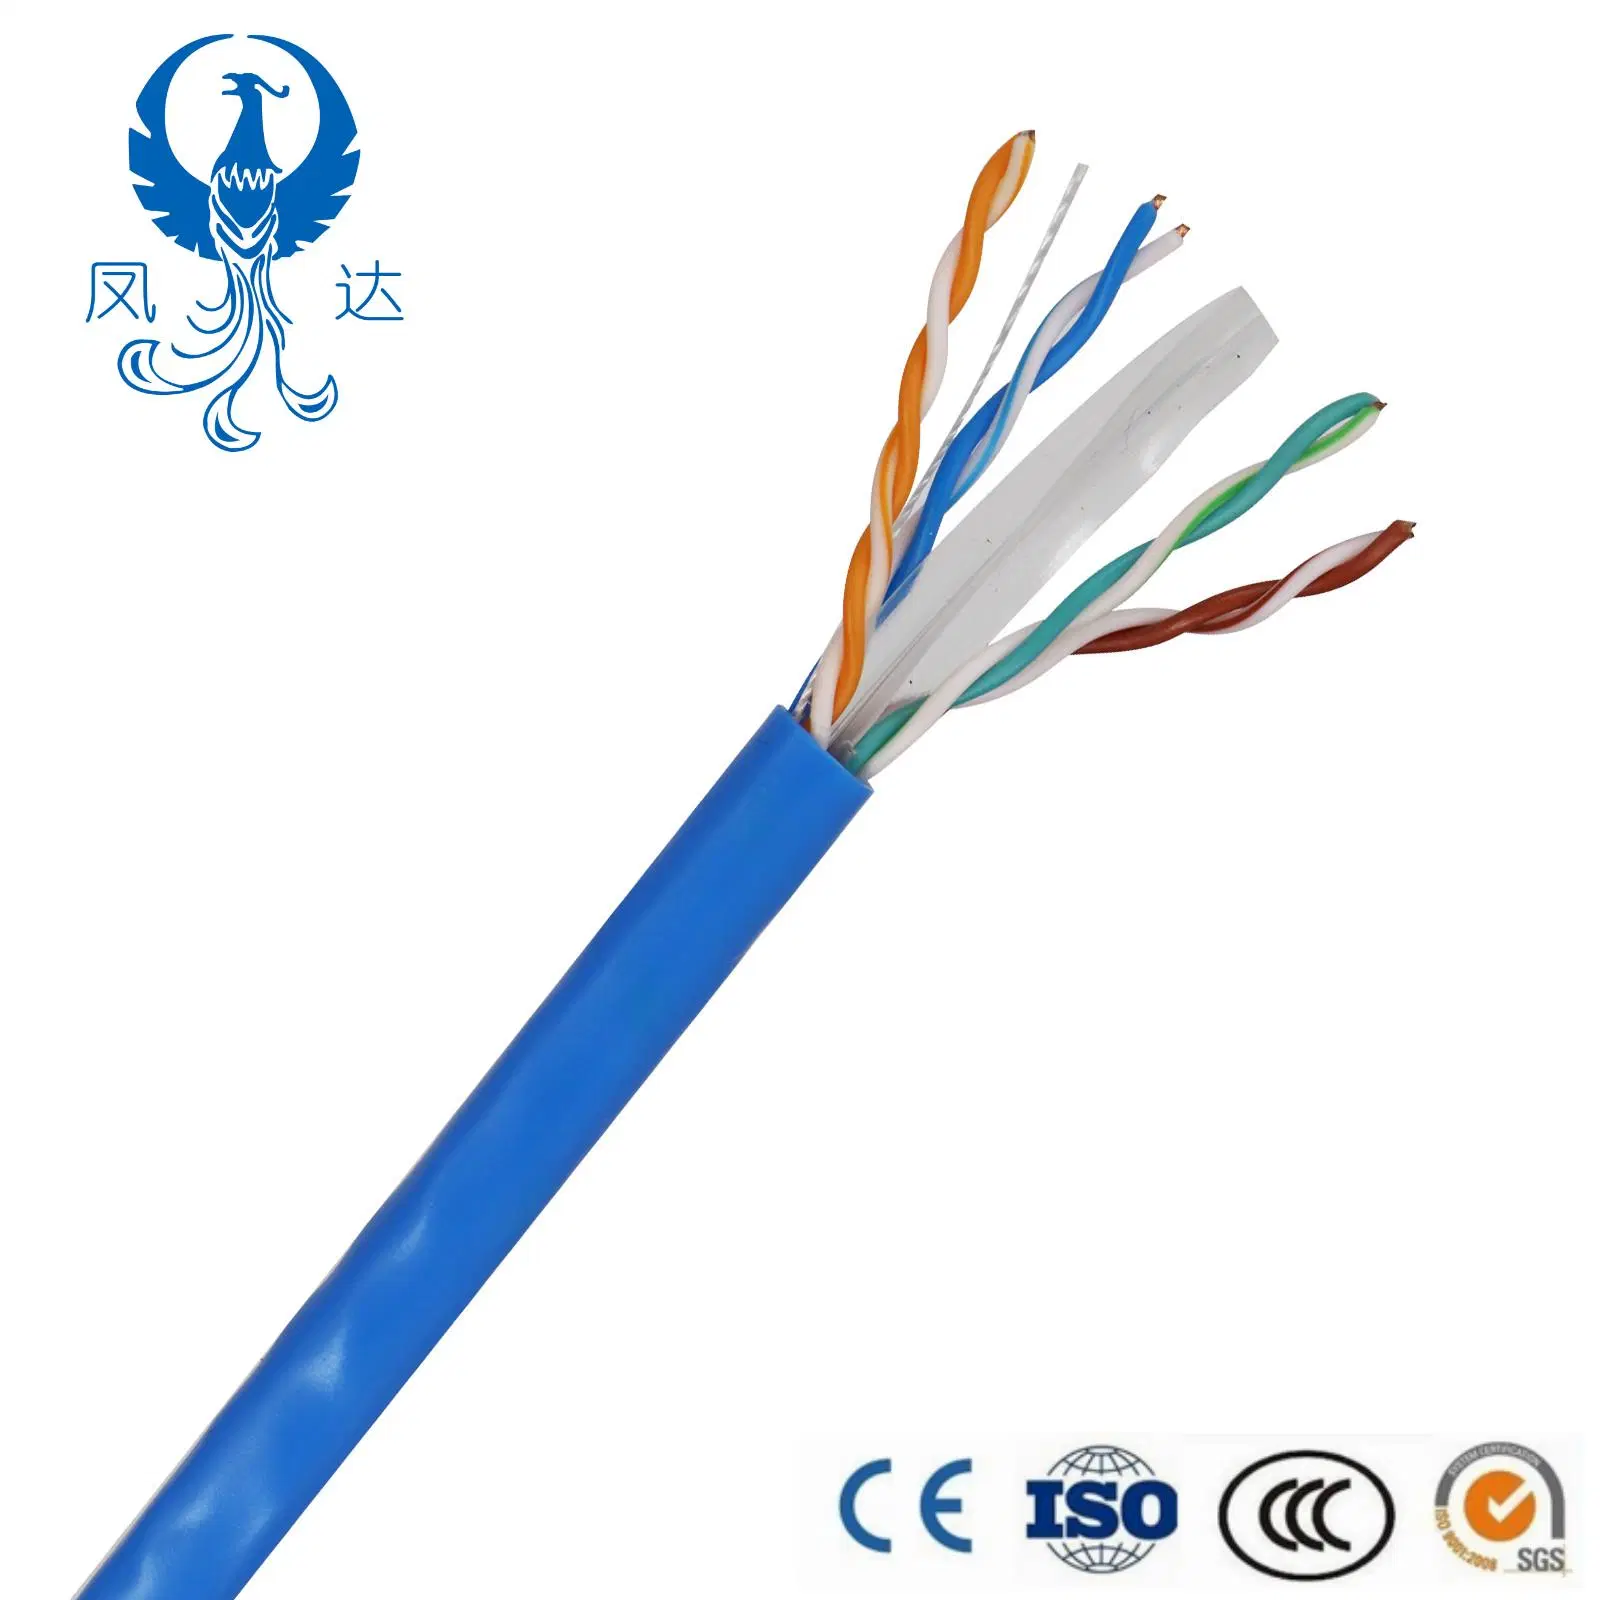 Certificated UTP Cat5e FTP CAT6 SFTP CAT6A Solid 23AWG Poe LAN Cable